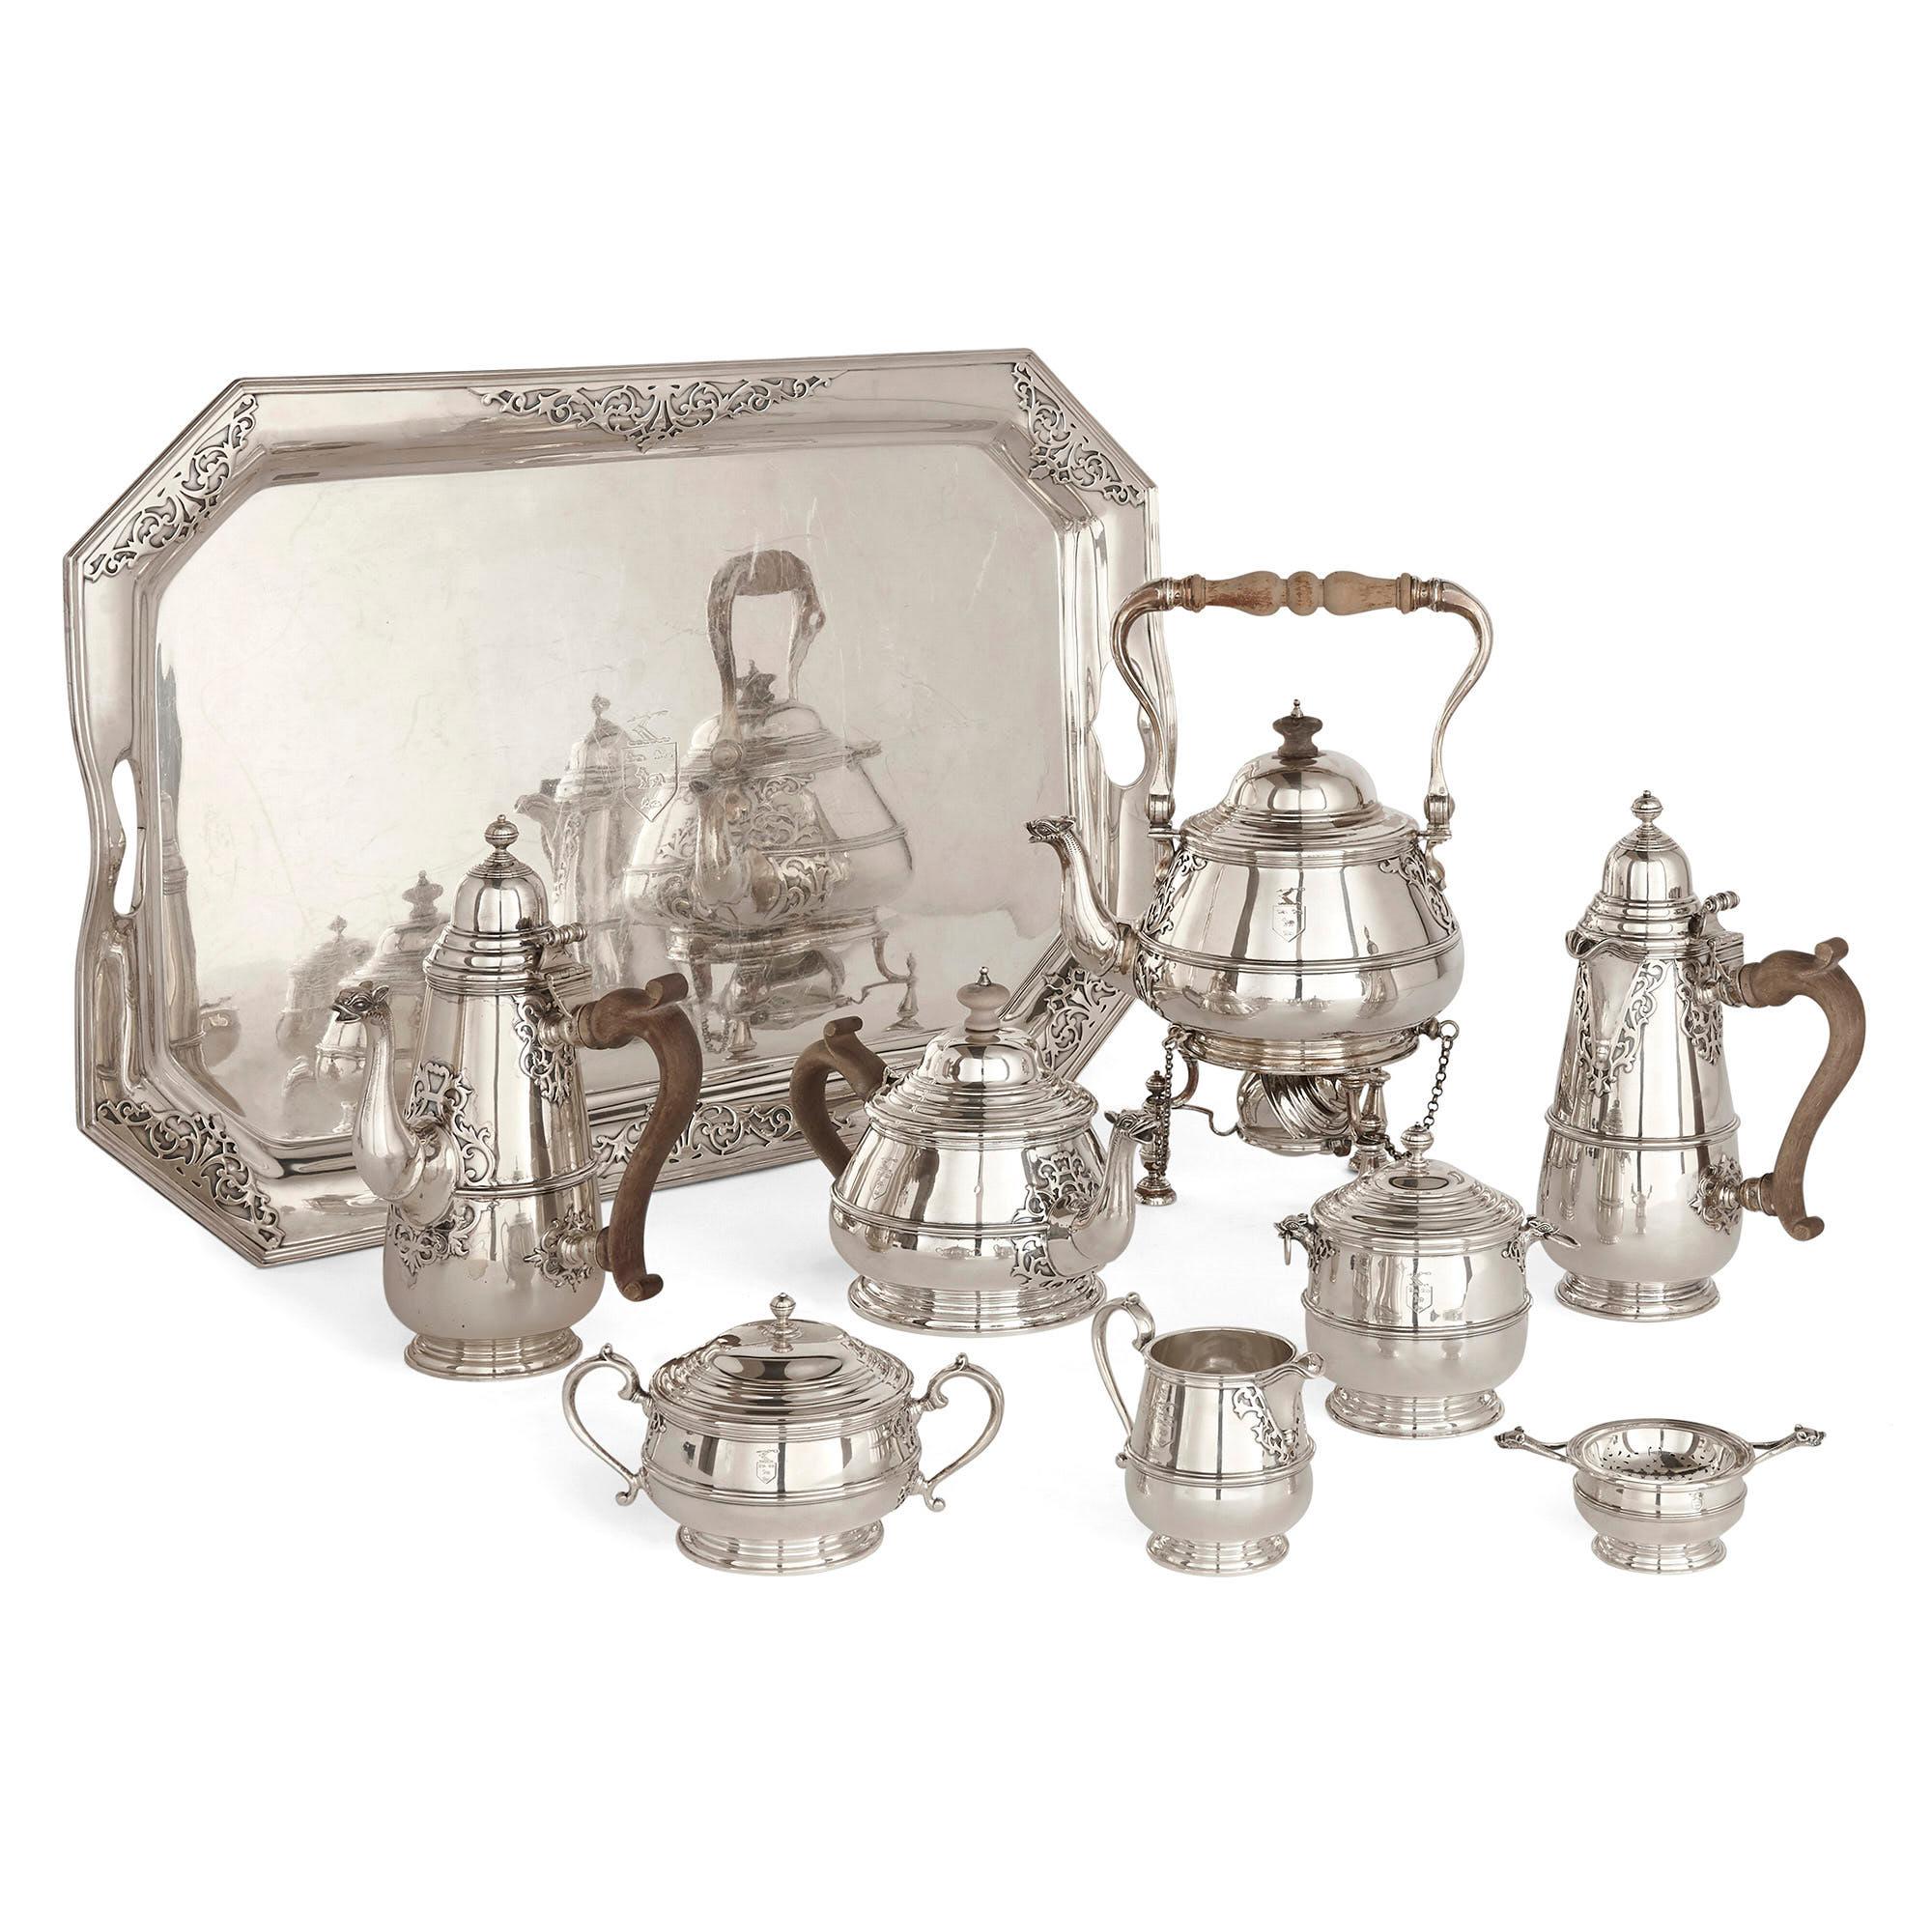 Silver tea and coffee set with matching tray
English, 1920-1921
Kettle on lampstand: Height 33cm, width 23cm, depth 16cm
Tray: Height 3cm, width 64cm, depth 44cm

This large silver set is comprised of a coffee pot, a tea pot, a kettle, a